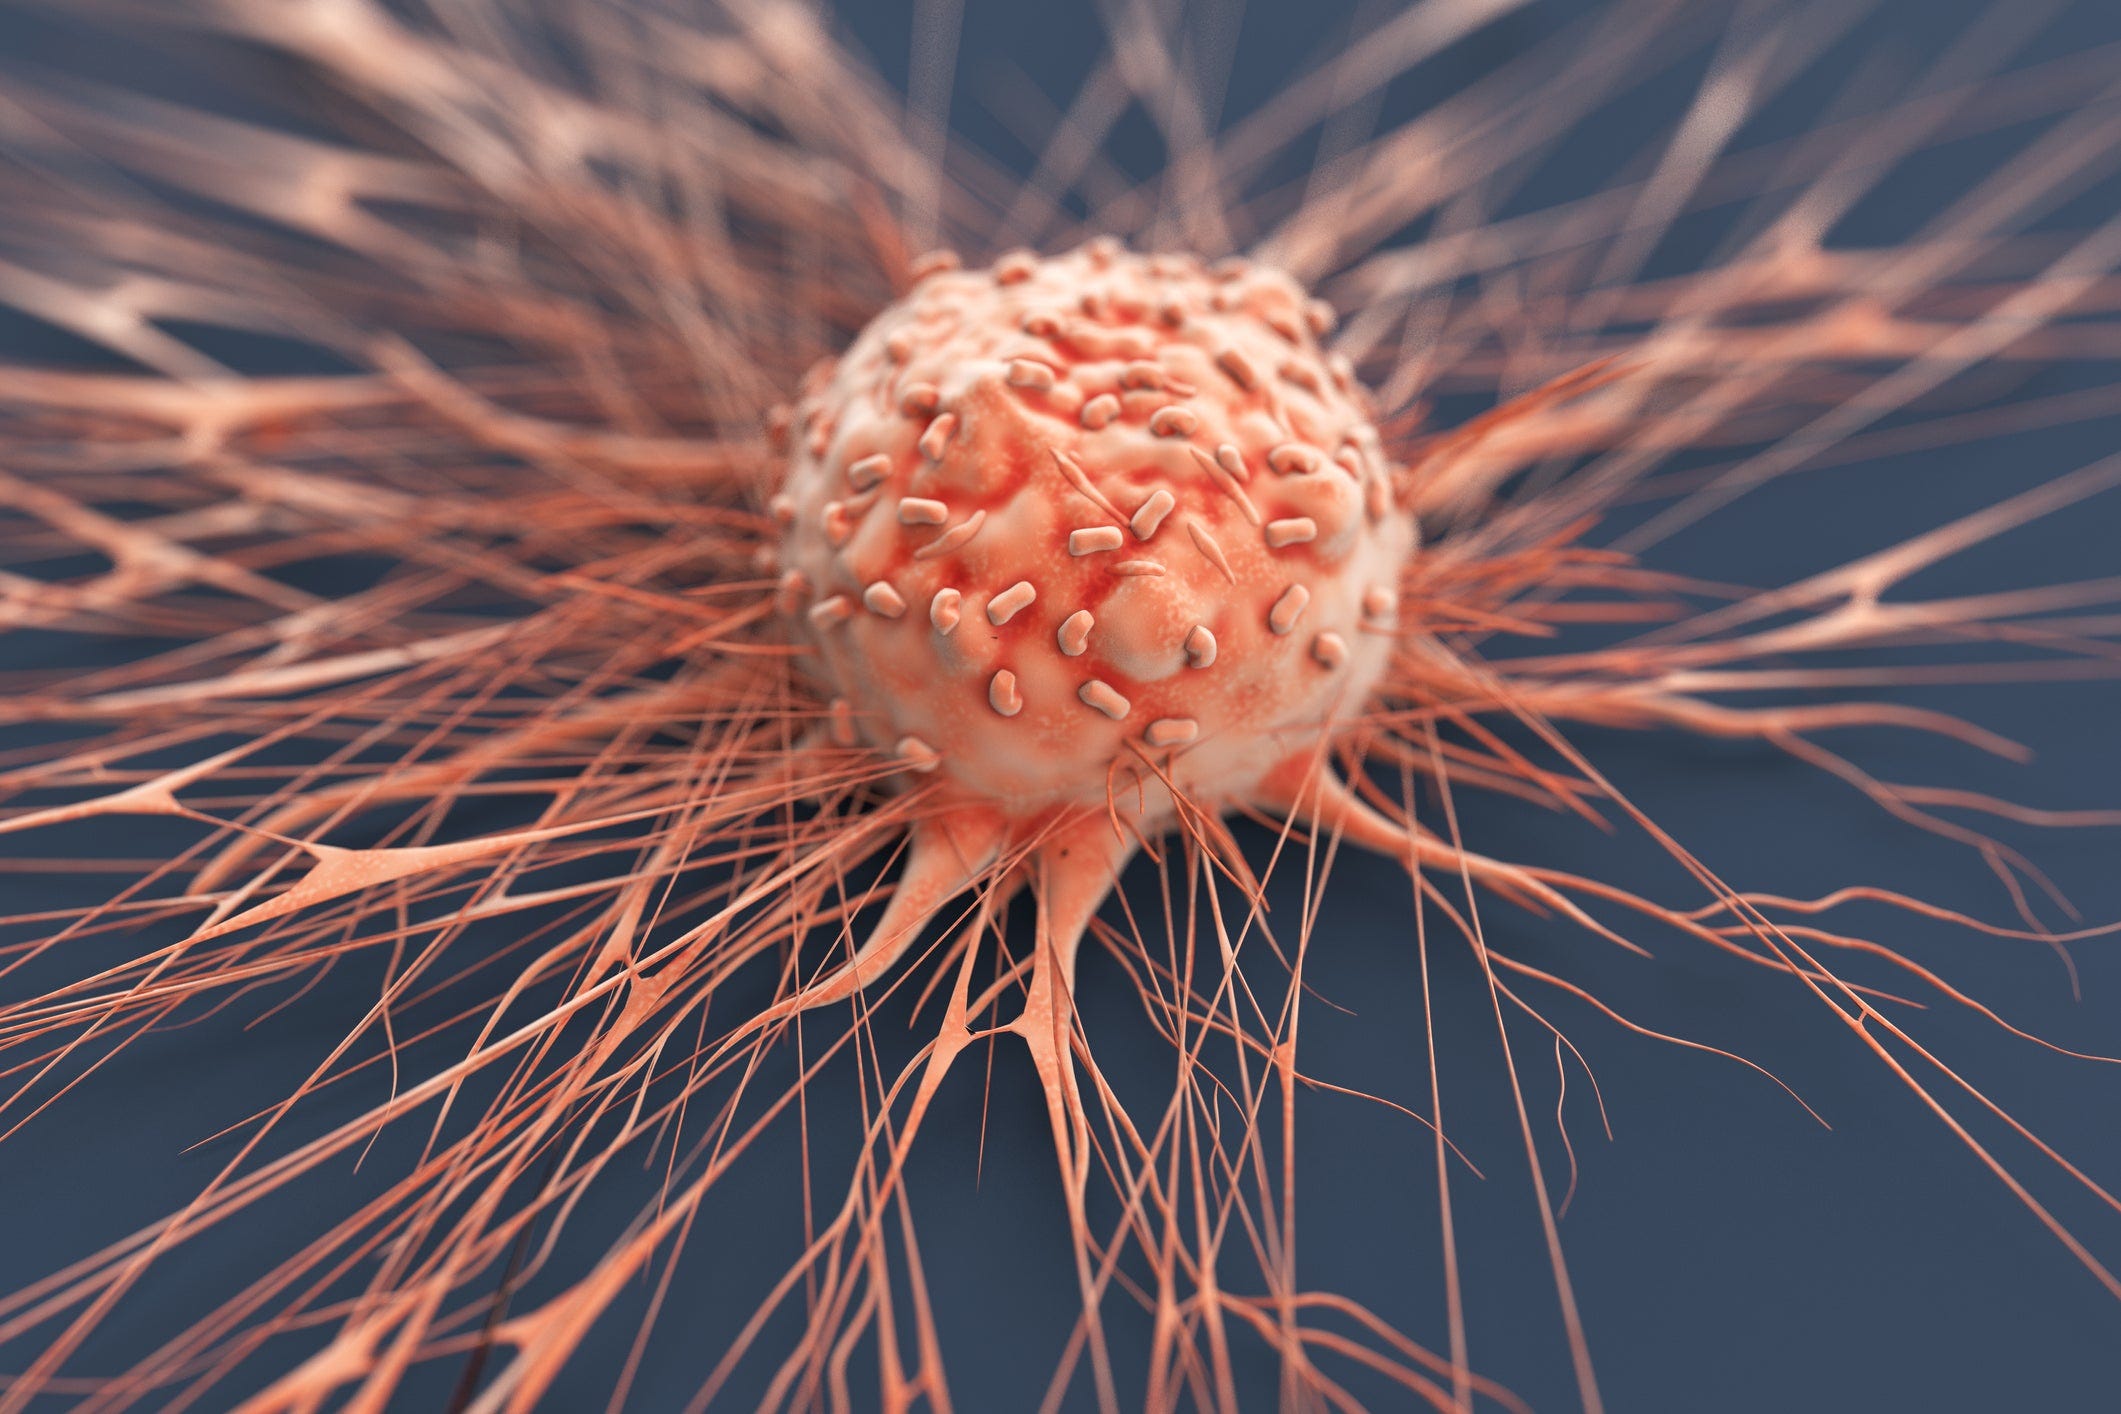 New cancer treatment takes personalized medicine to a new level